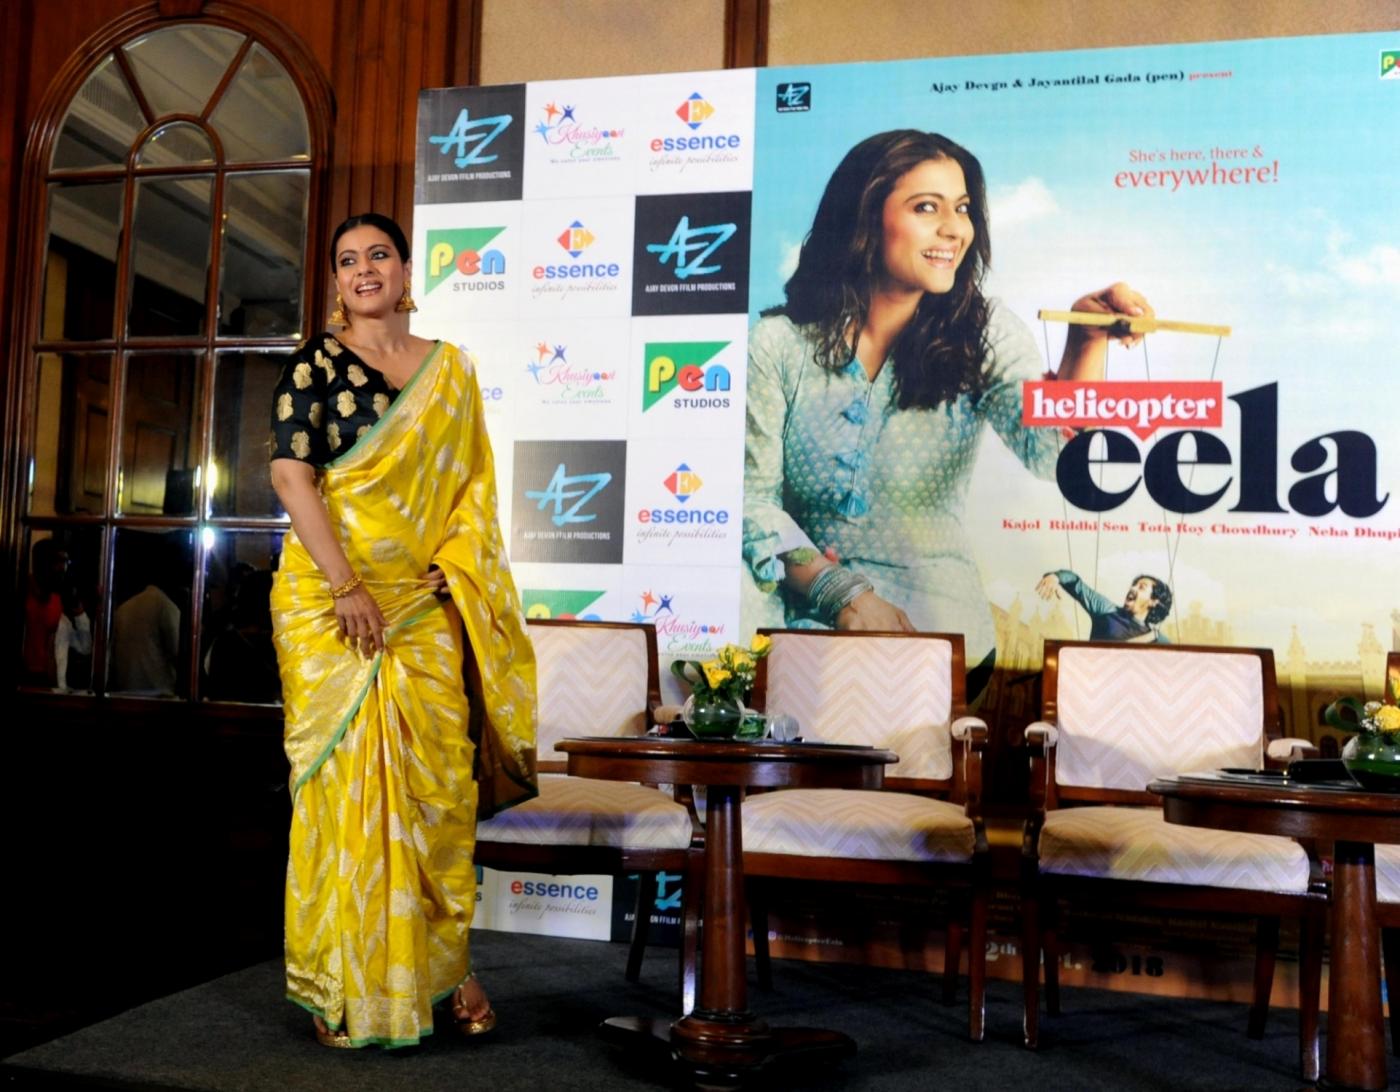 Kolkata: Actress Kajol during a press conference to promote her upcoming film "Helicopter Eela" in Kolkata, on Oct 9, 2018. (Photo: IANS) by .